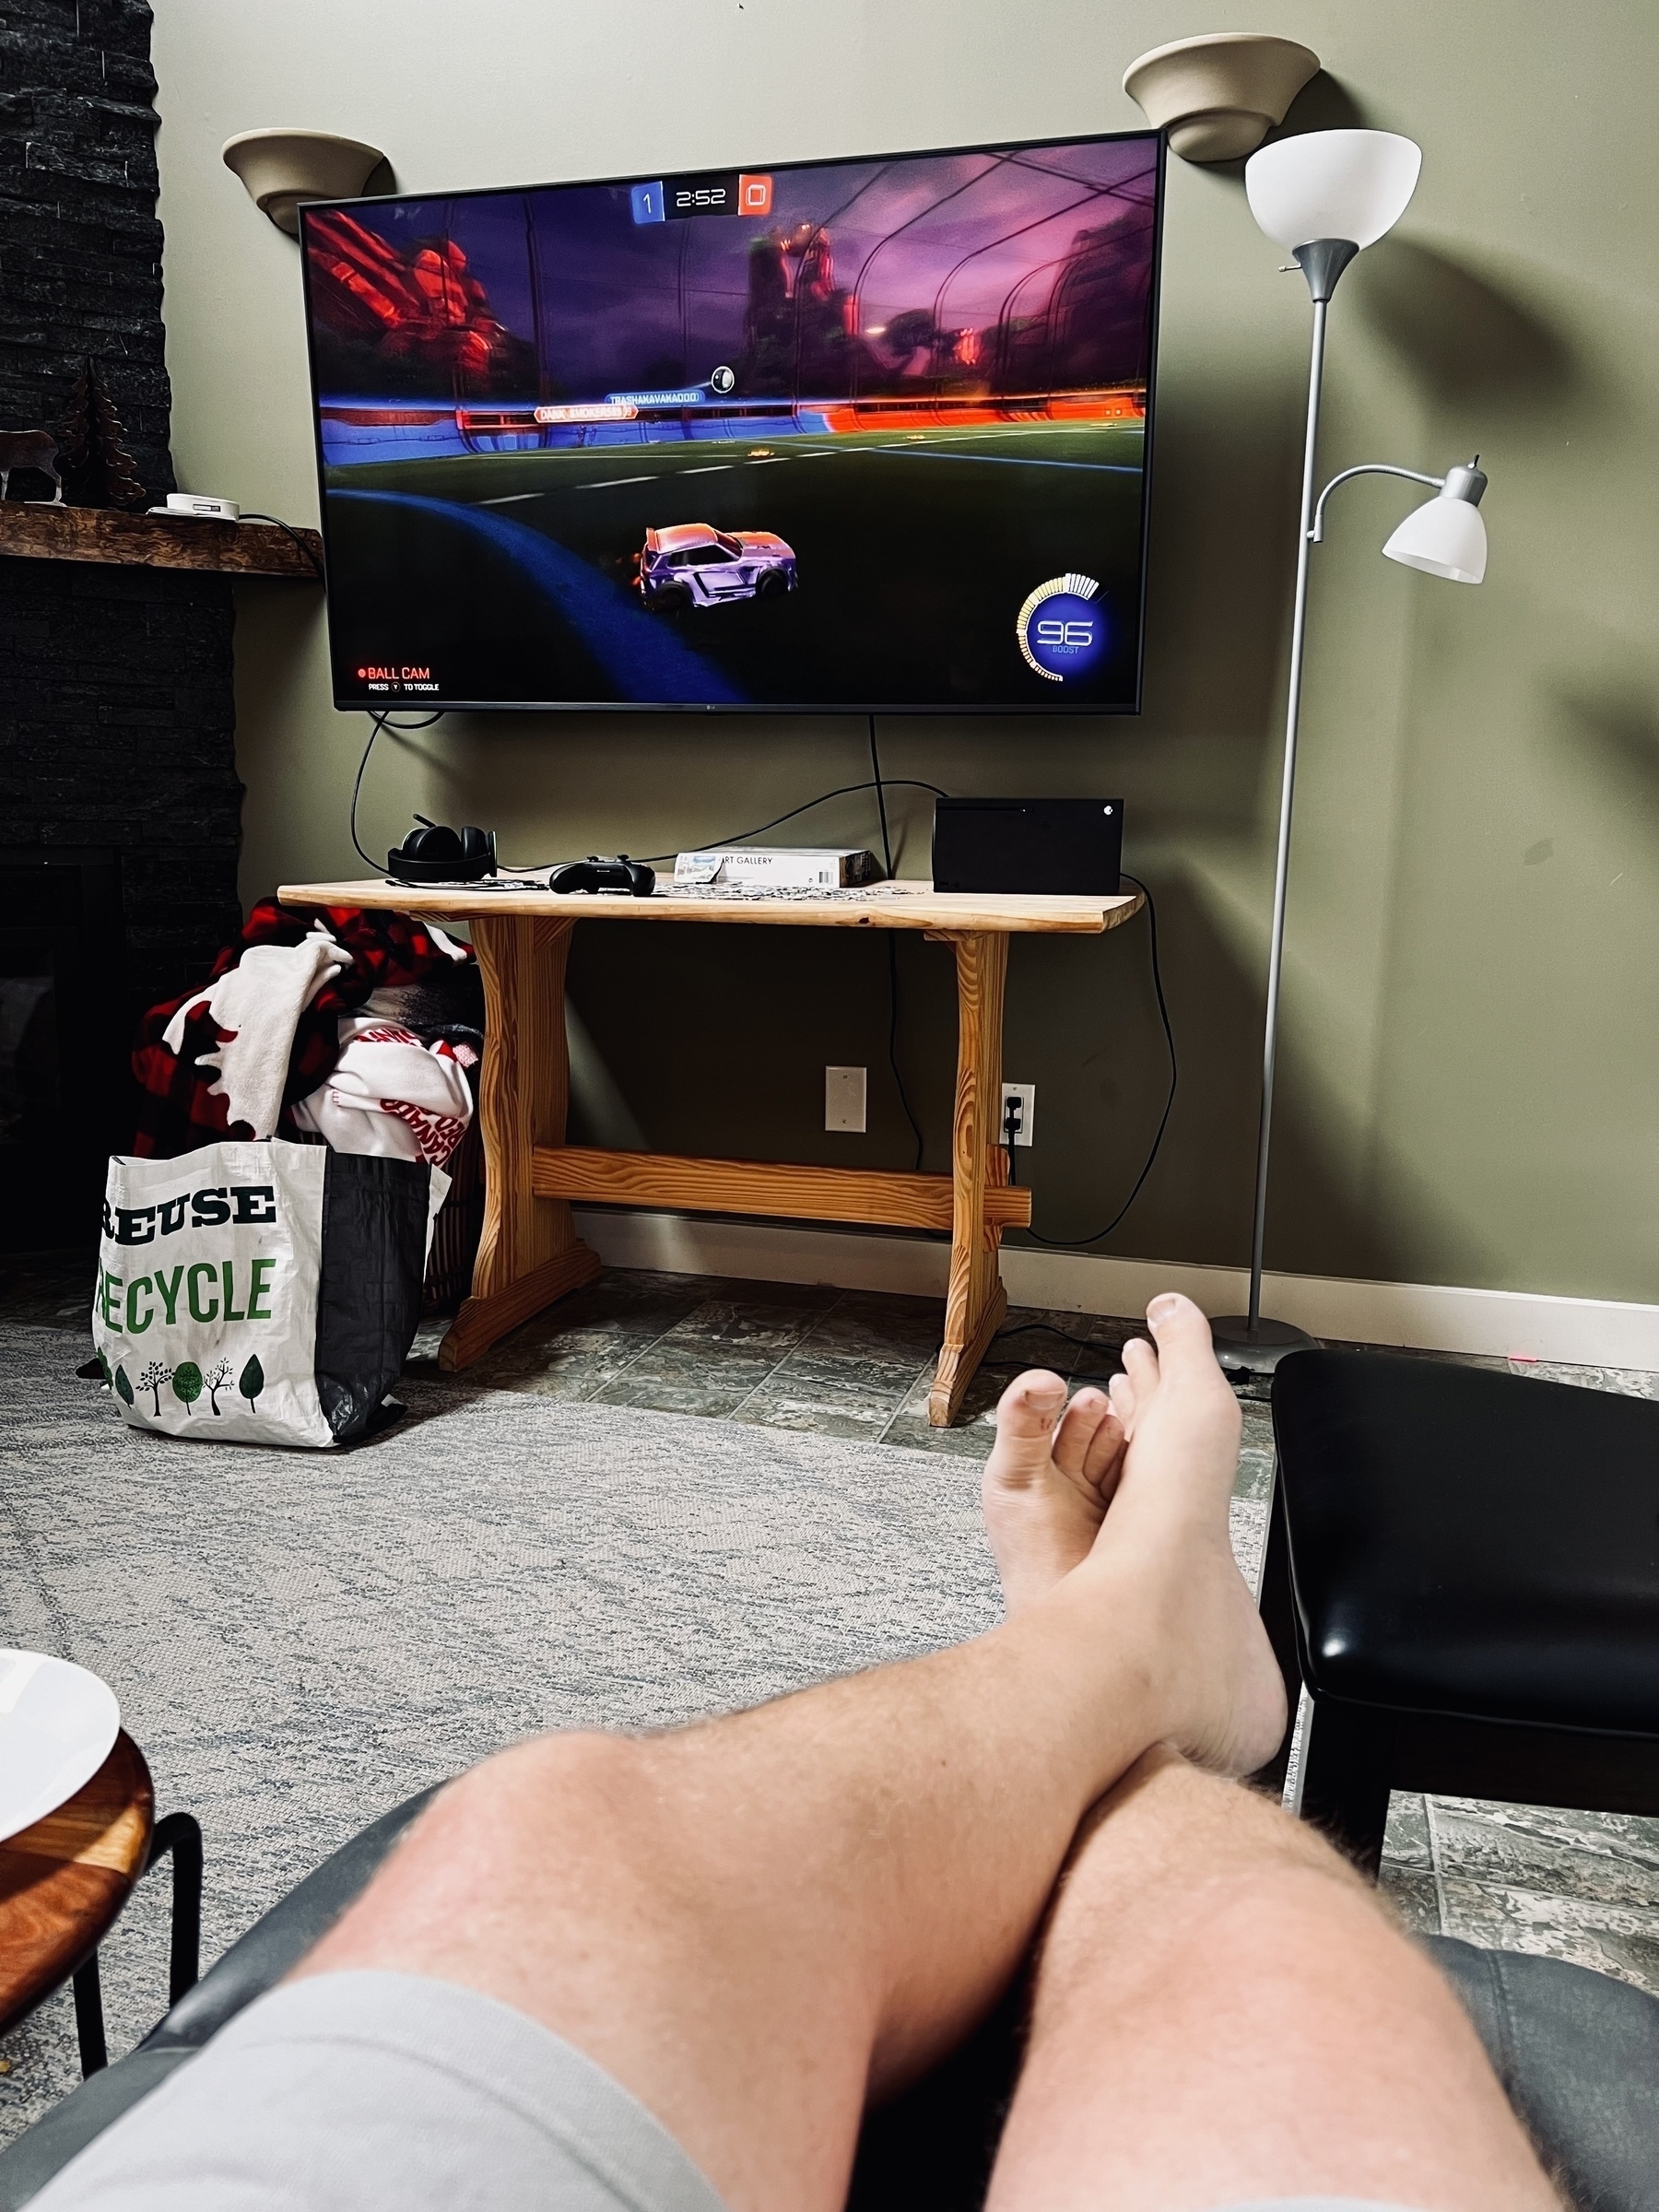 Photo of me sitting on a couch with feet up and a tv with Rocket League being played on an Xbox. 